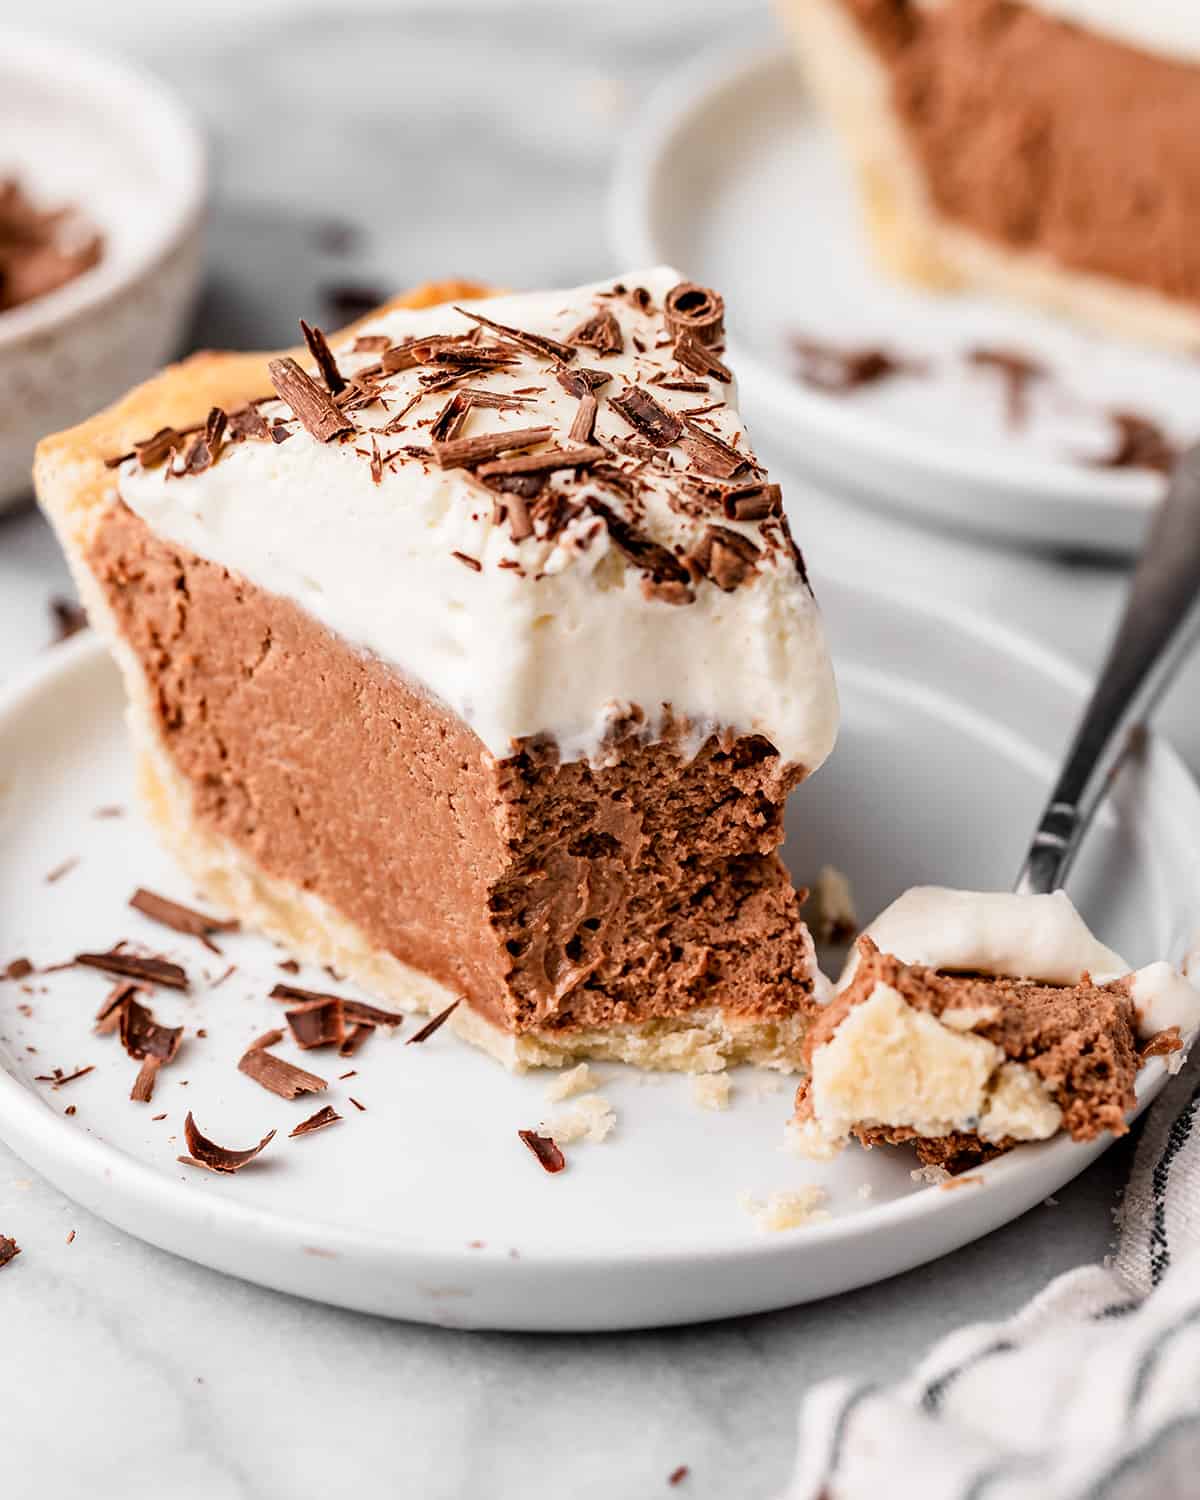 French Silk Pie on a plate with a bite taken out of it